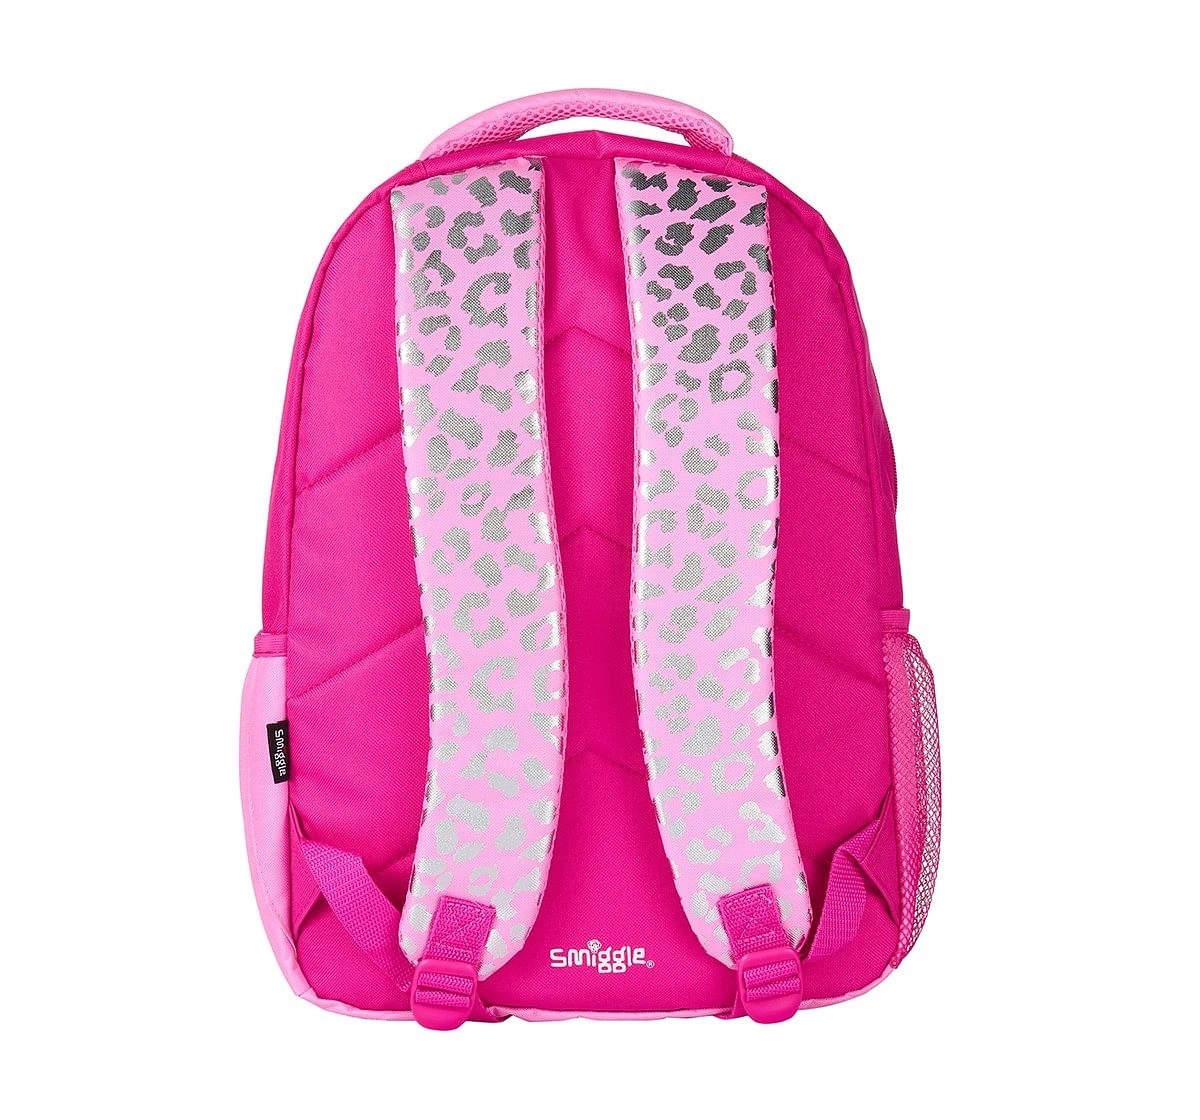 Smiggle Block Backpack - Leopard Print Bags for Kids age 3Y+ (Pink)